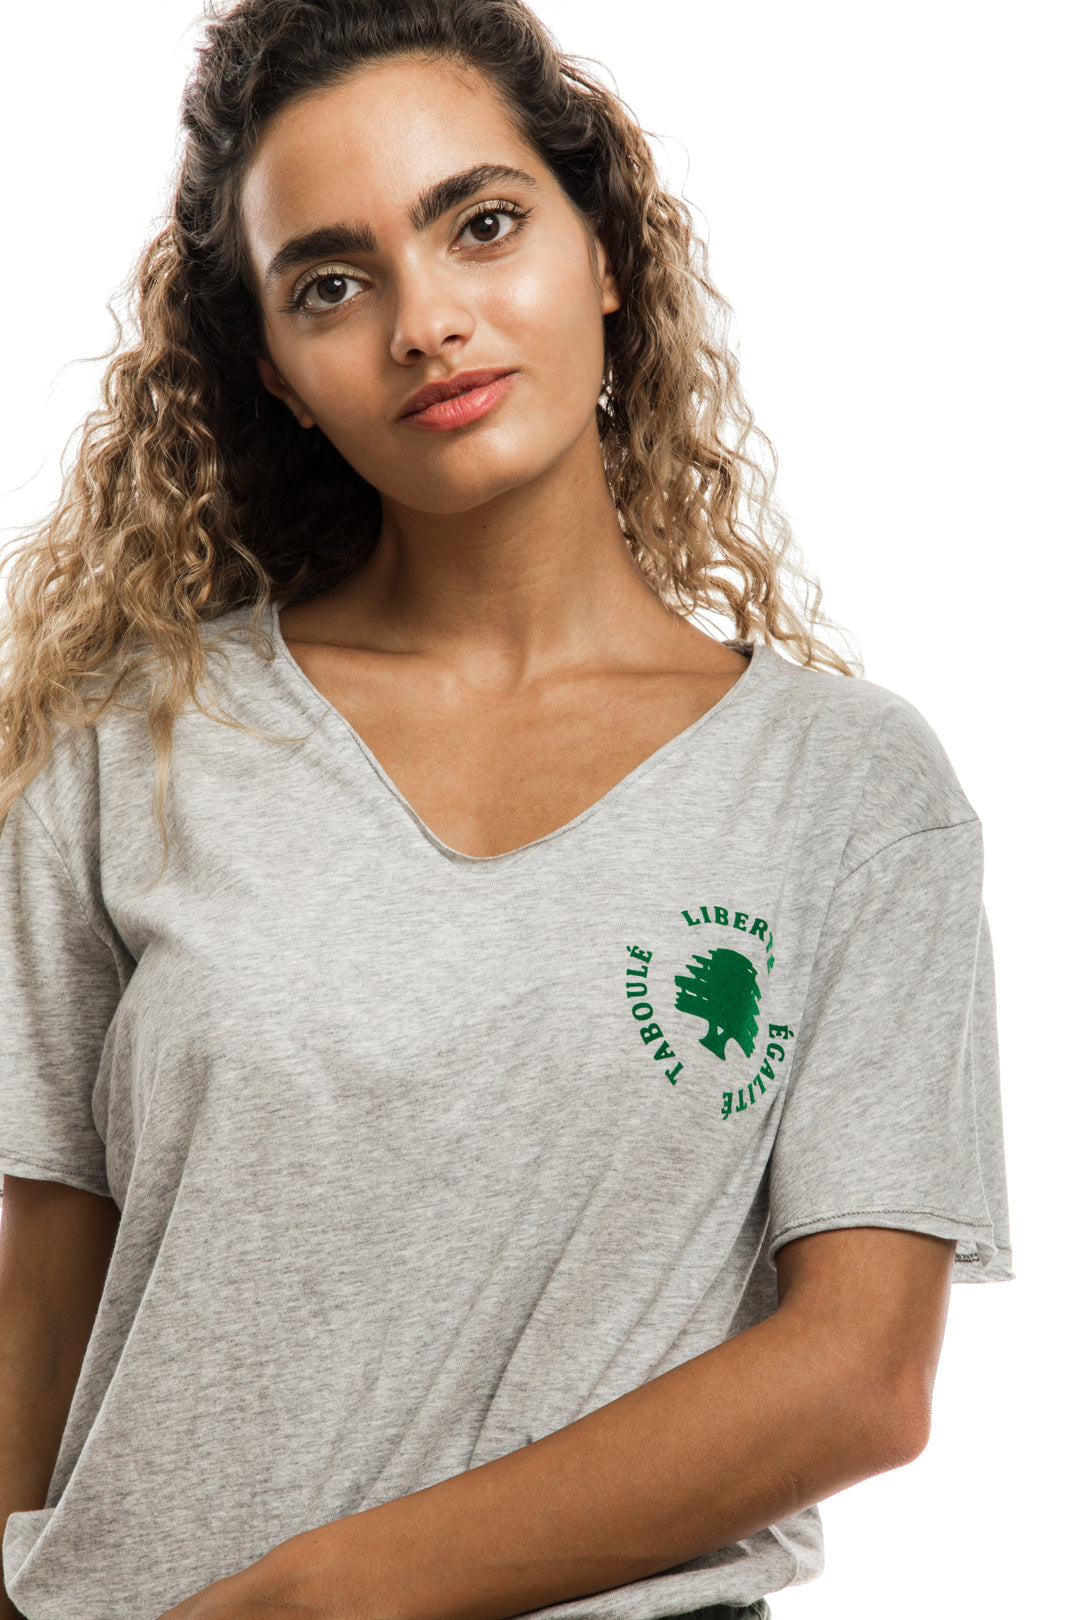 young adult female wearing grey t-shirt with liberté égalité taboulé written in french and in green in the center of the t-shirt along with olive green shorts